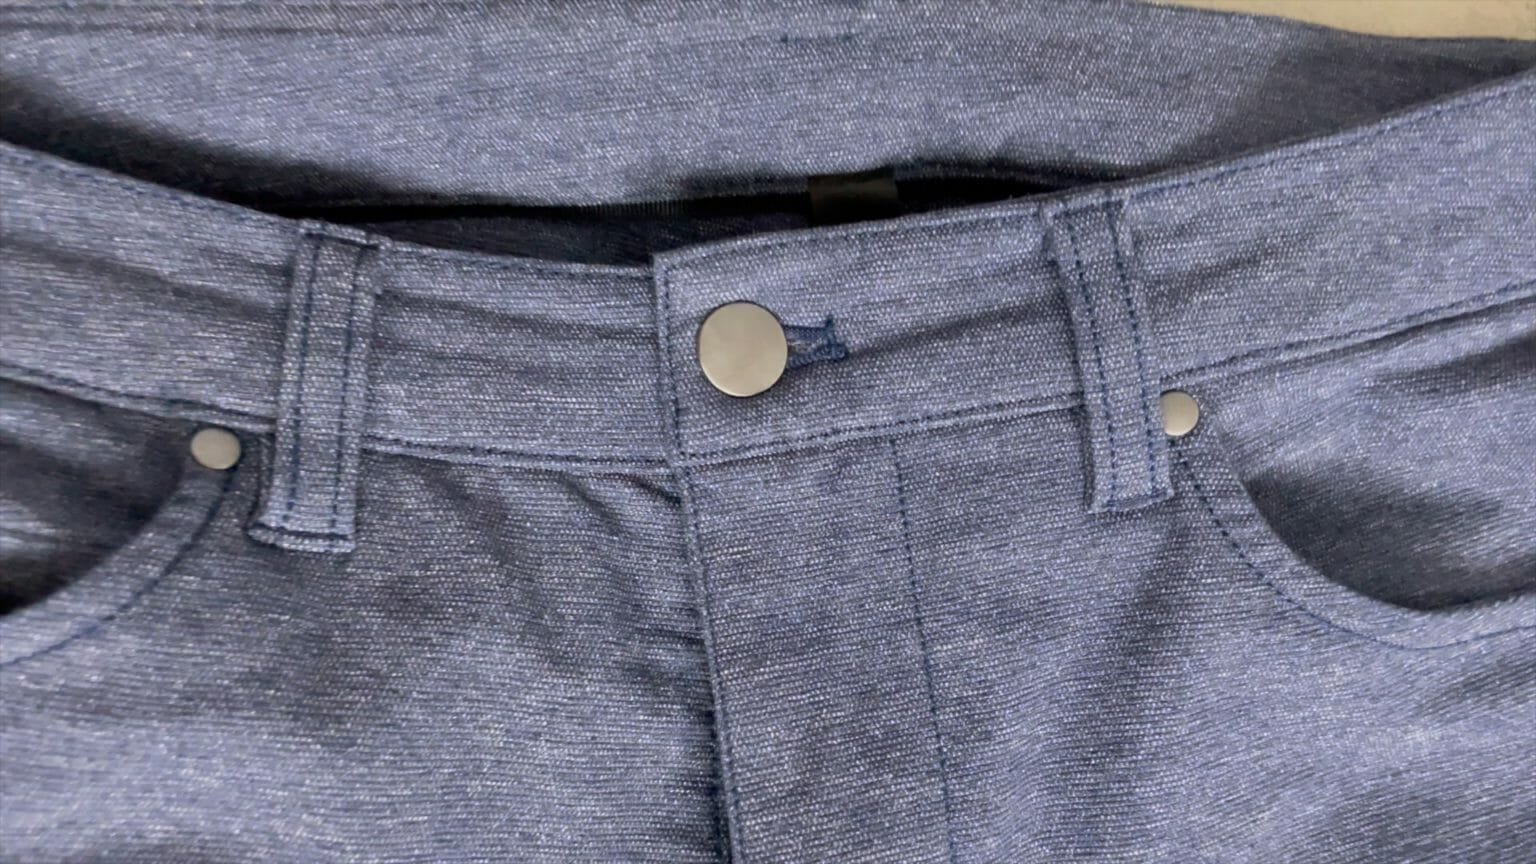 Lululemon ABC Pants Review, Price, and Where to Buy